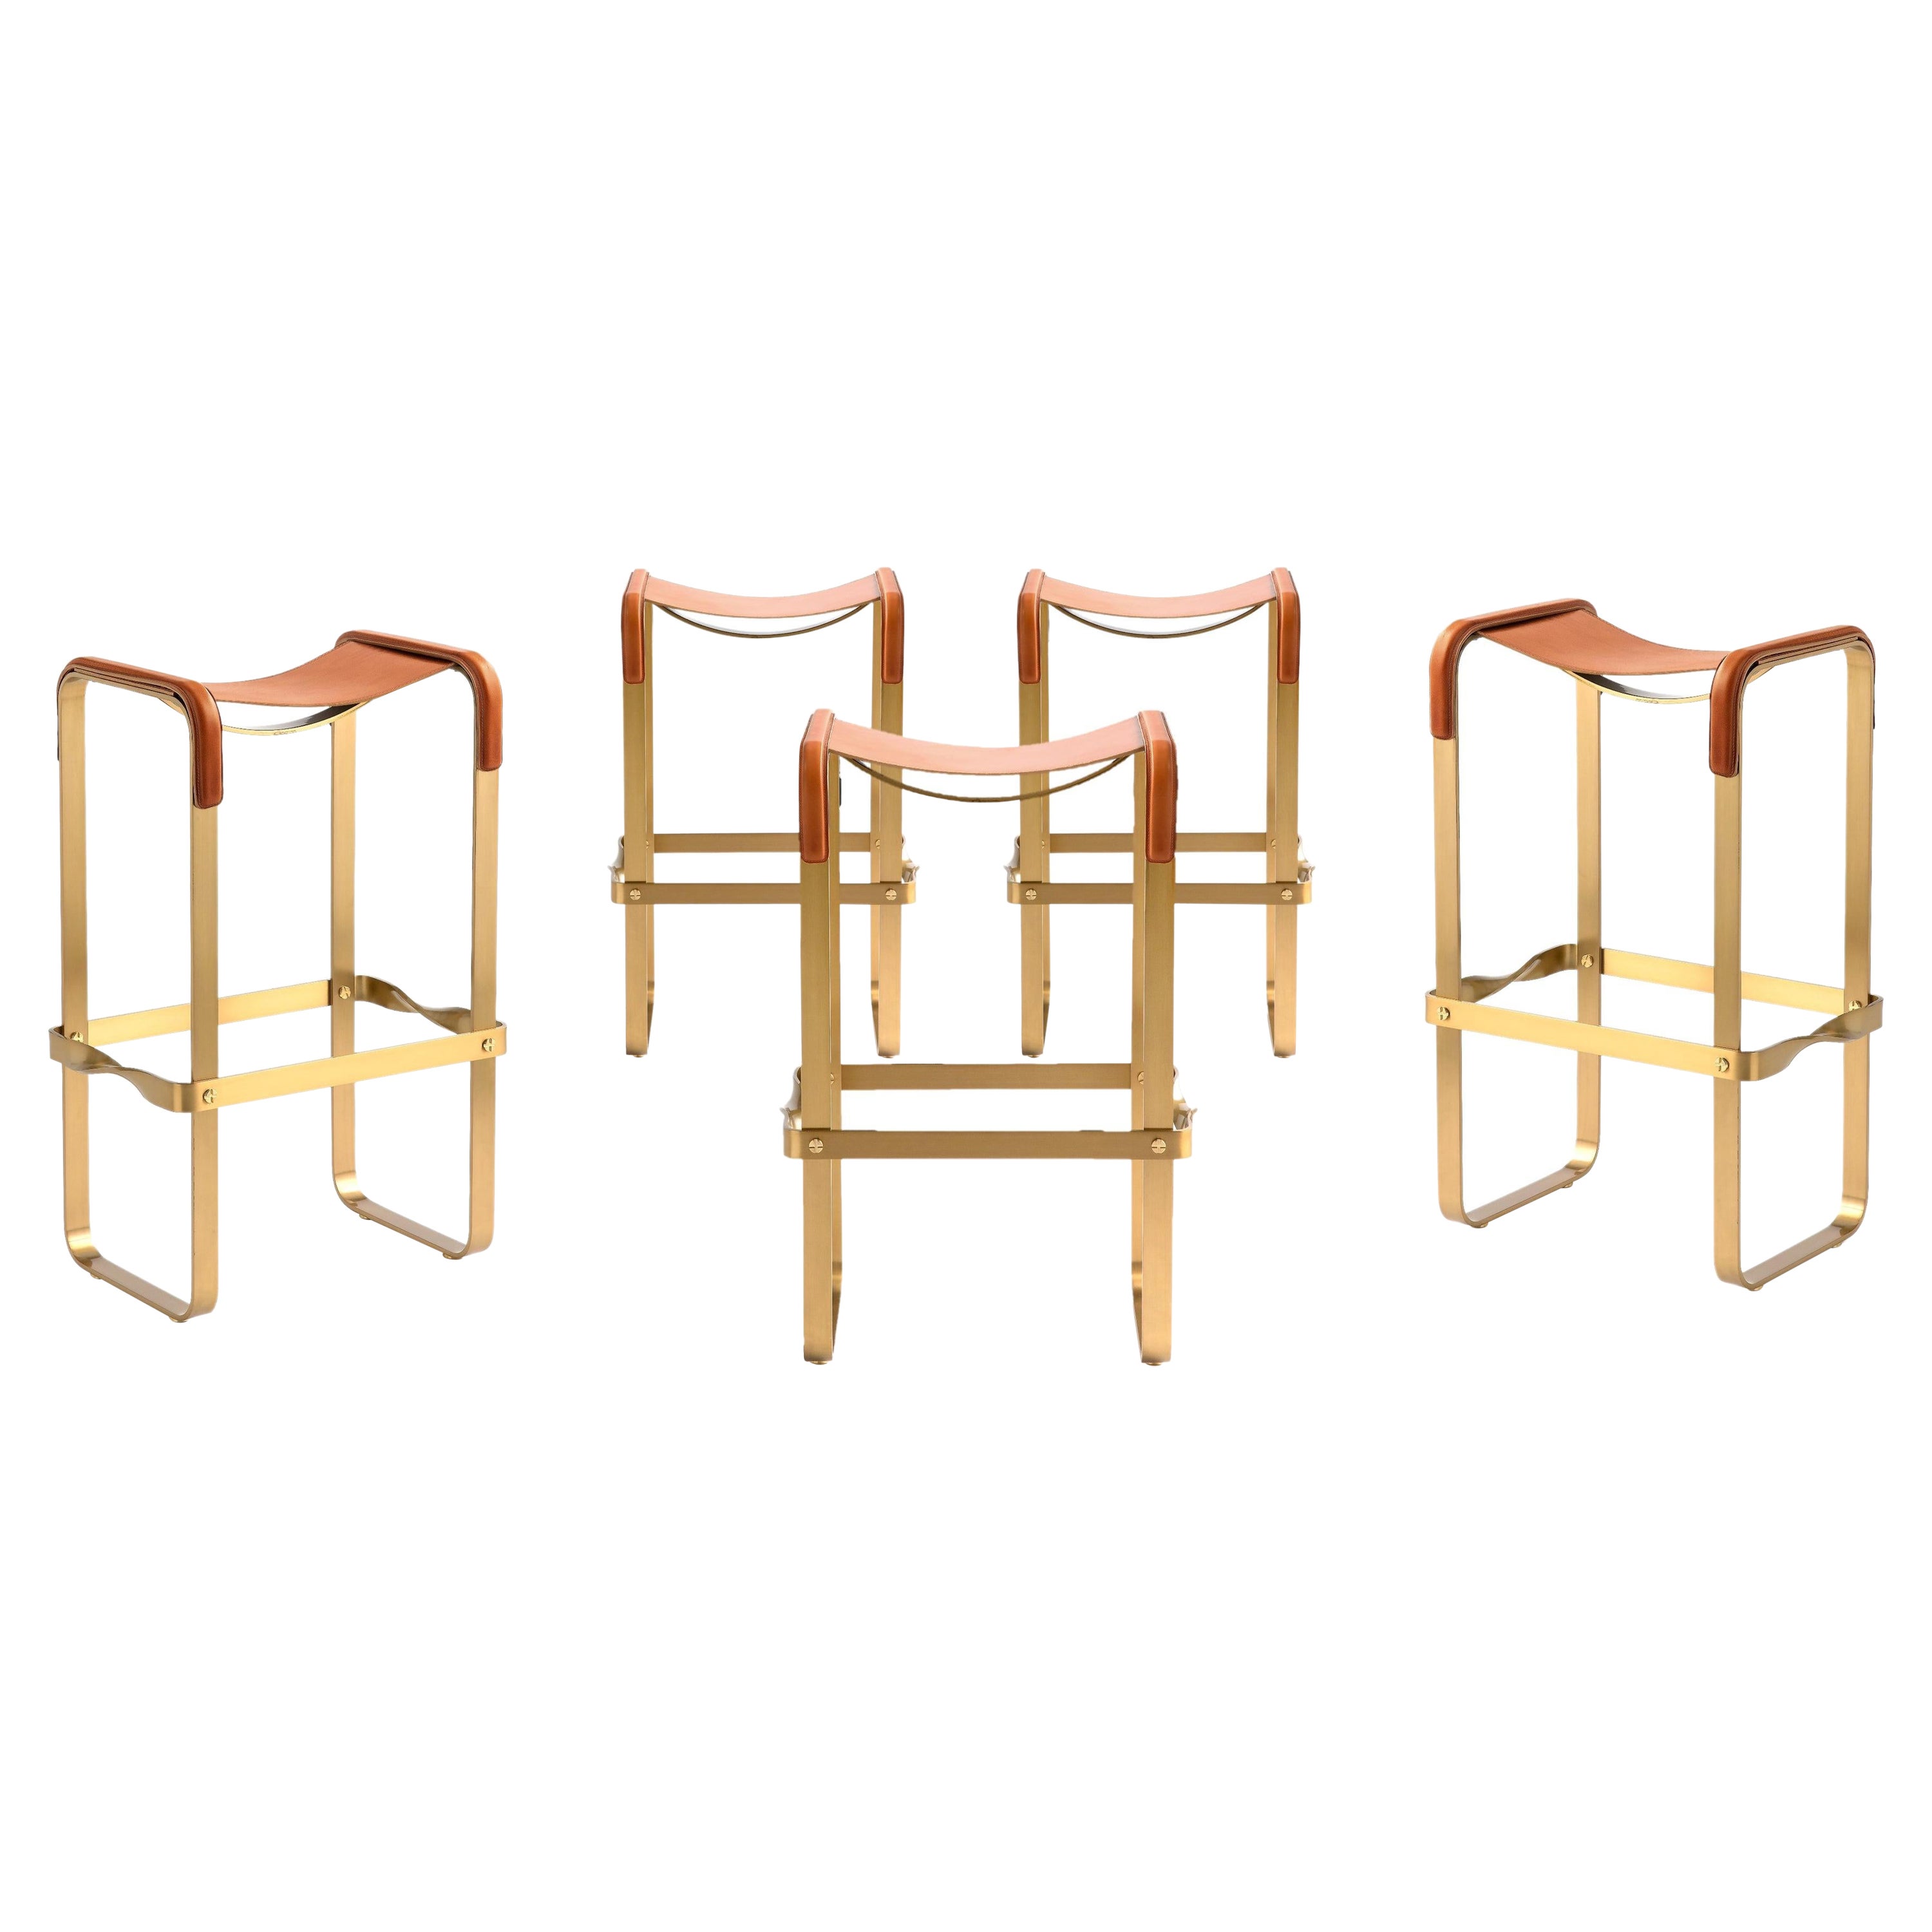 Set of 5 Contemporary Bar Stool Aged Brass Metal & Natural Tobacco Leather